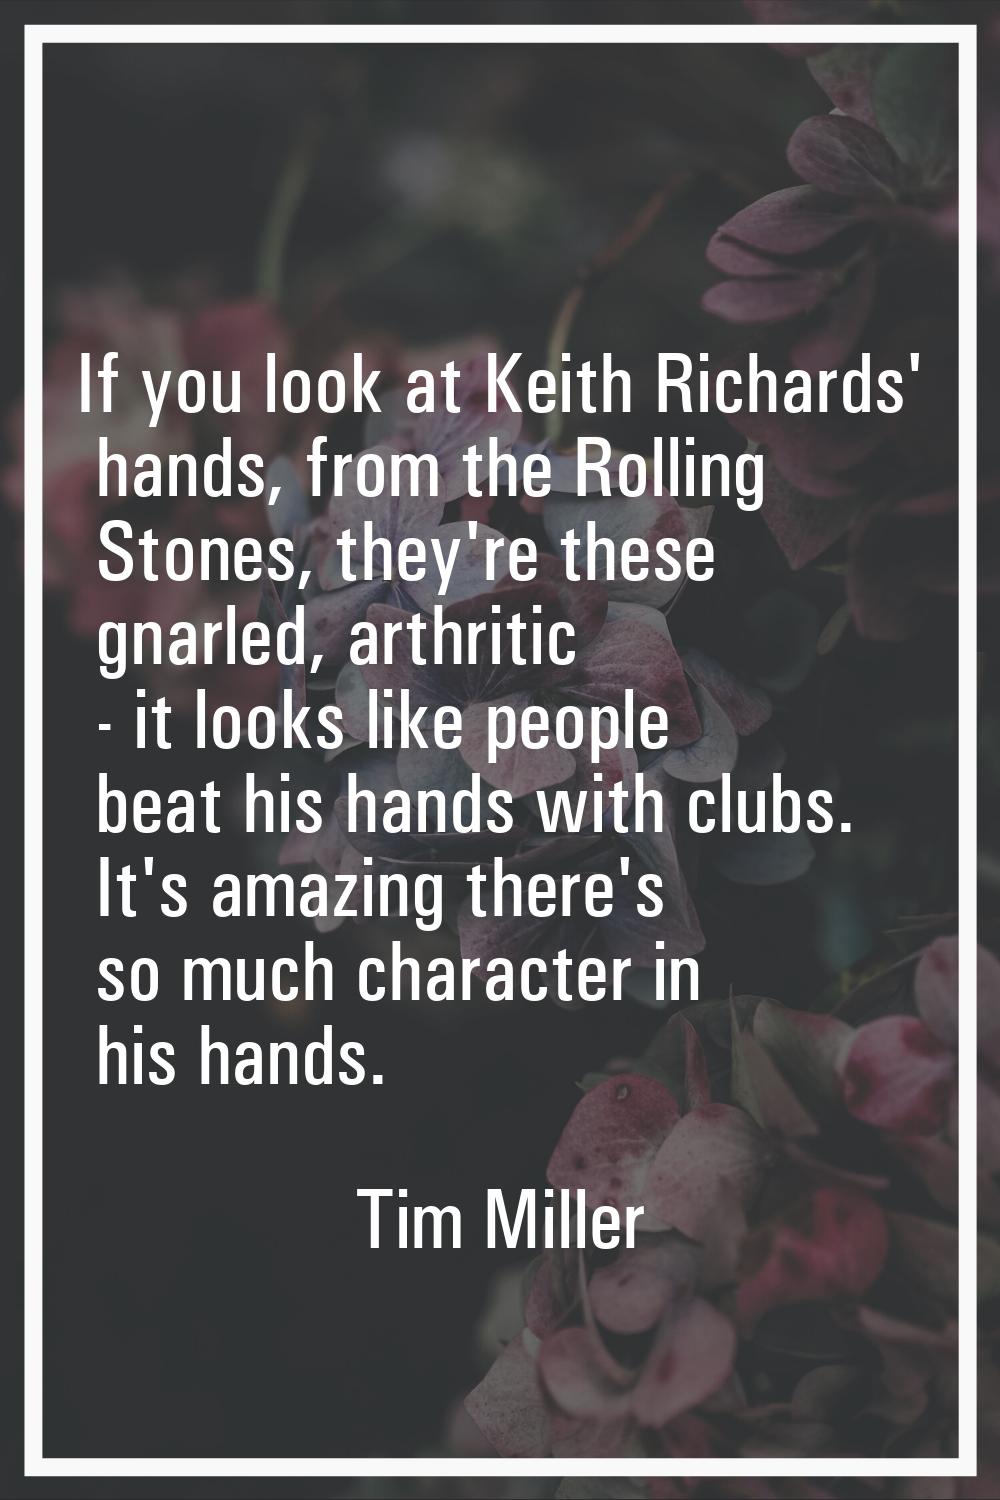 If you look at Keith Richards' hands, from the Rolling Stones, they're these gnarled, arthritic - i